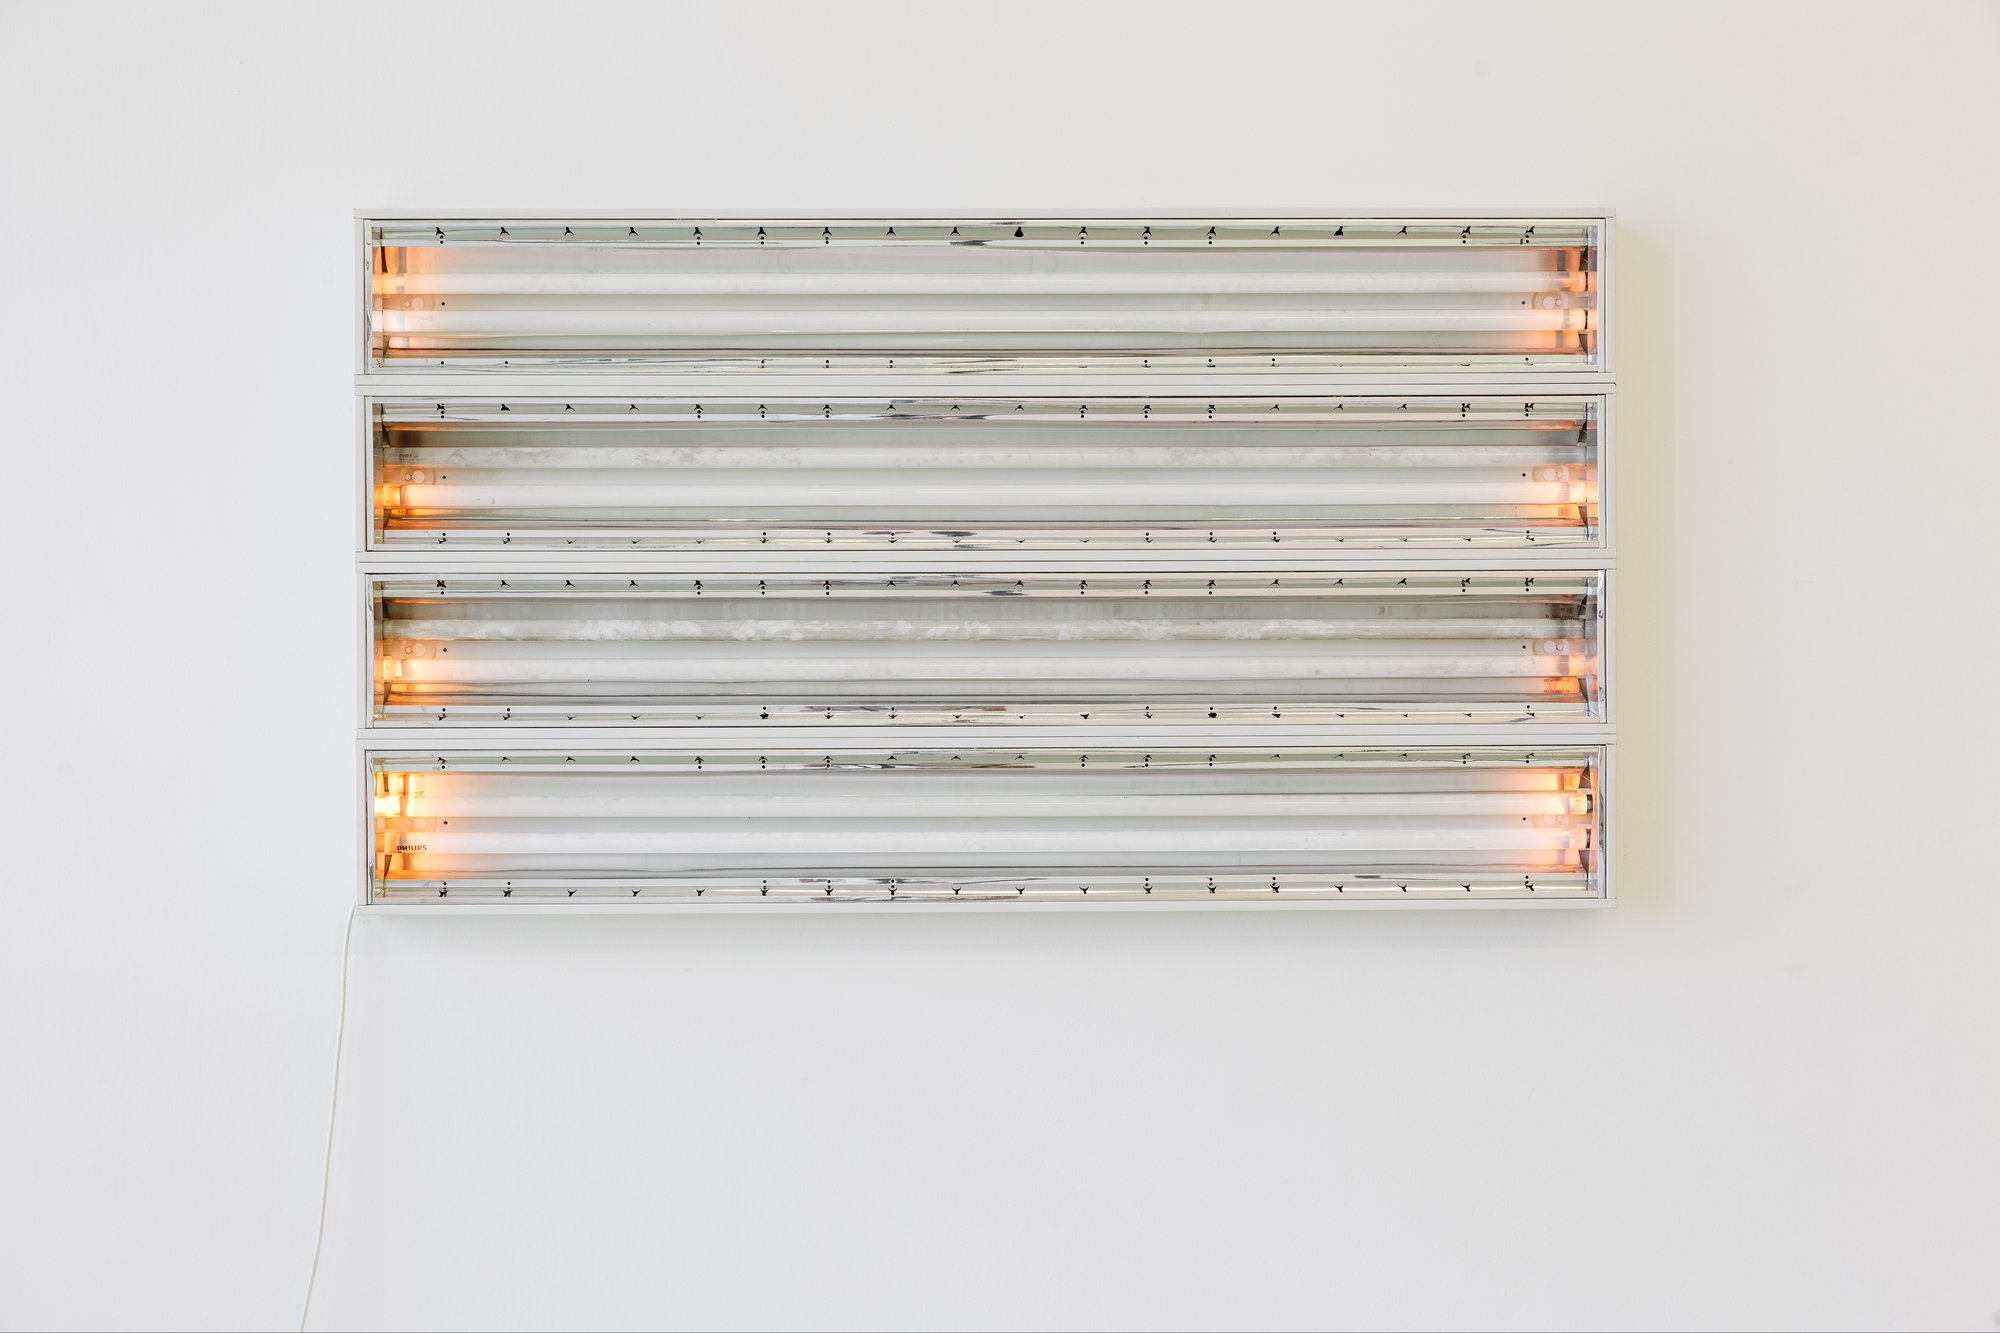 Iris Touliatou, Untitled (Still not over you), ceiling light fixtures, aluminium frame, fluorescents, wires, cable, 153 x 21 x 9 cm each (60 1/4 x 8 1/4 x 3 1/2 in each), 2021. Installation view, Anti-Structure, DESTE Foundation, Athens, 2021